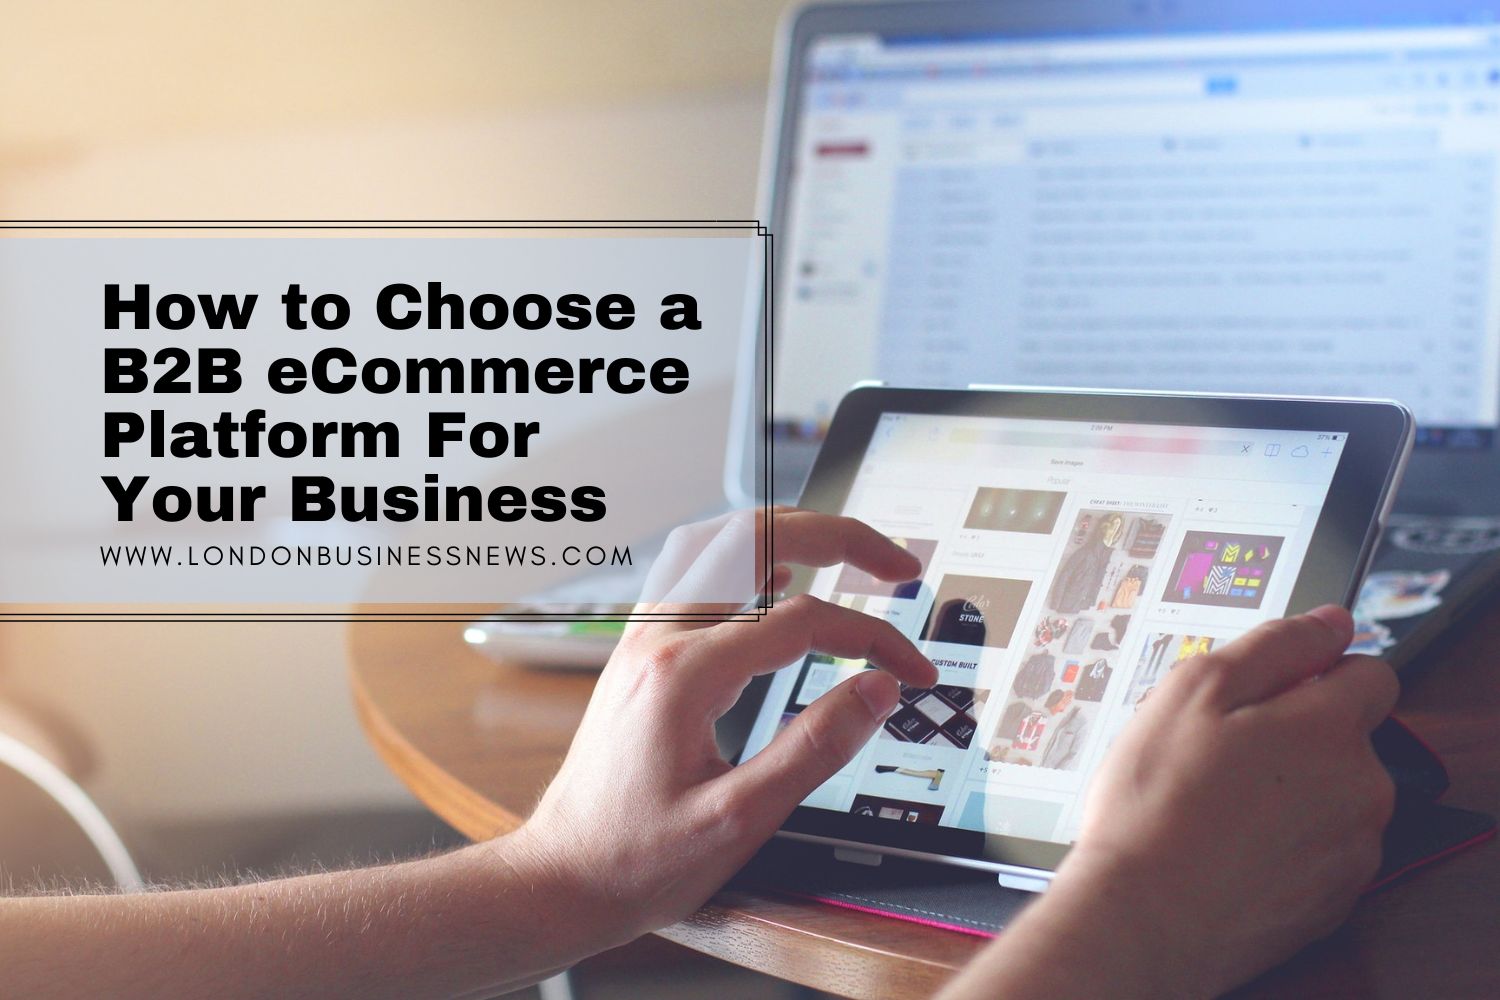 How-to-Choose-a-B2B-eCommerce-Platform-For-Your-Business